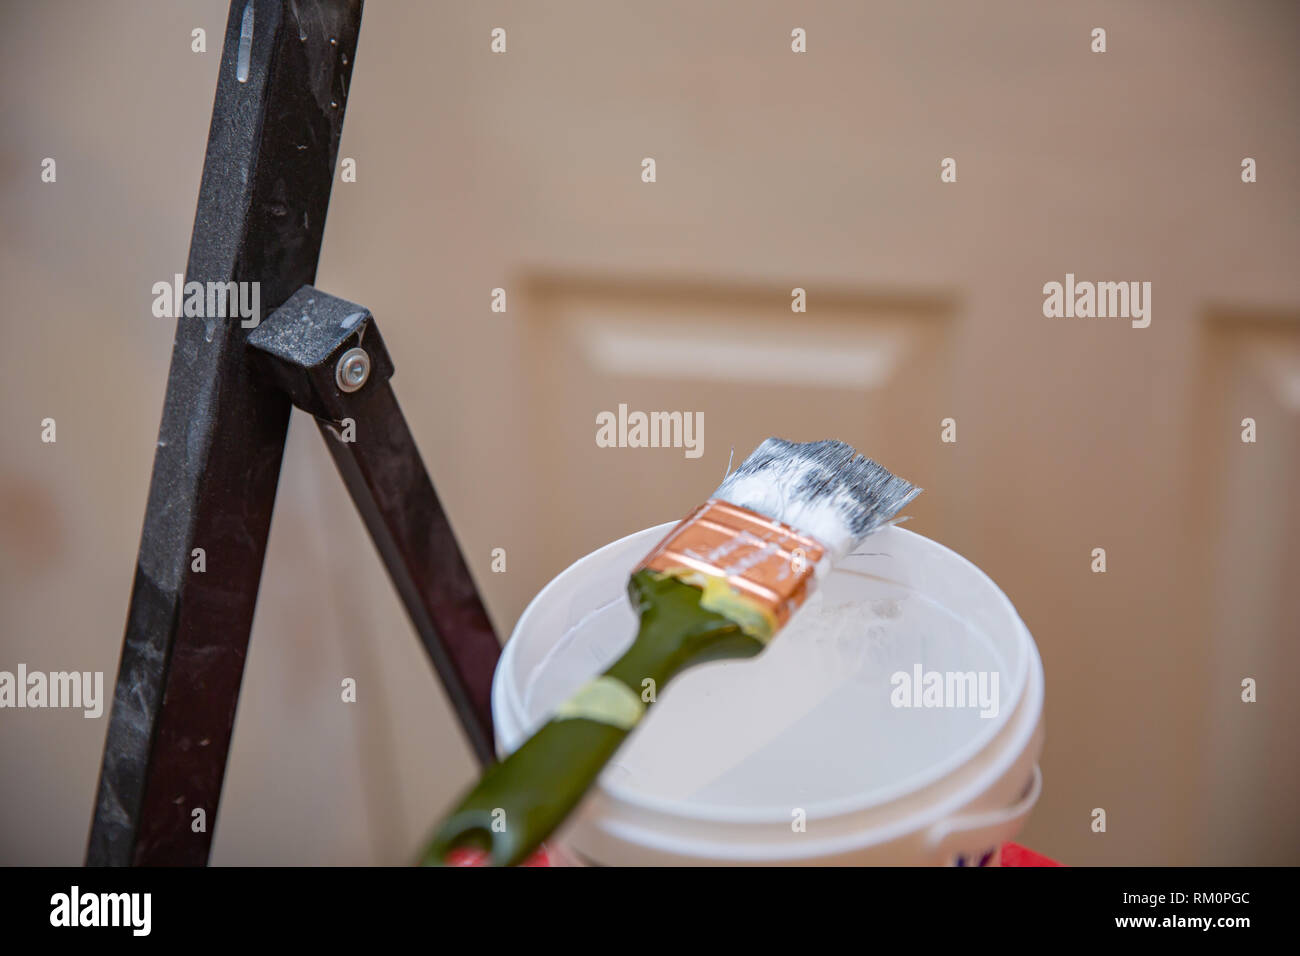 Bank with paint, brushe. repairs. Copy space Stock Photo